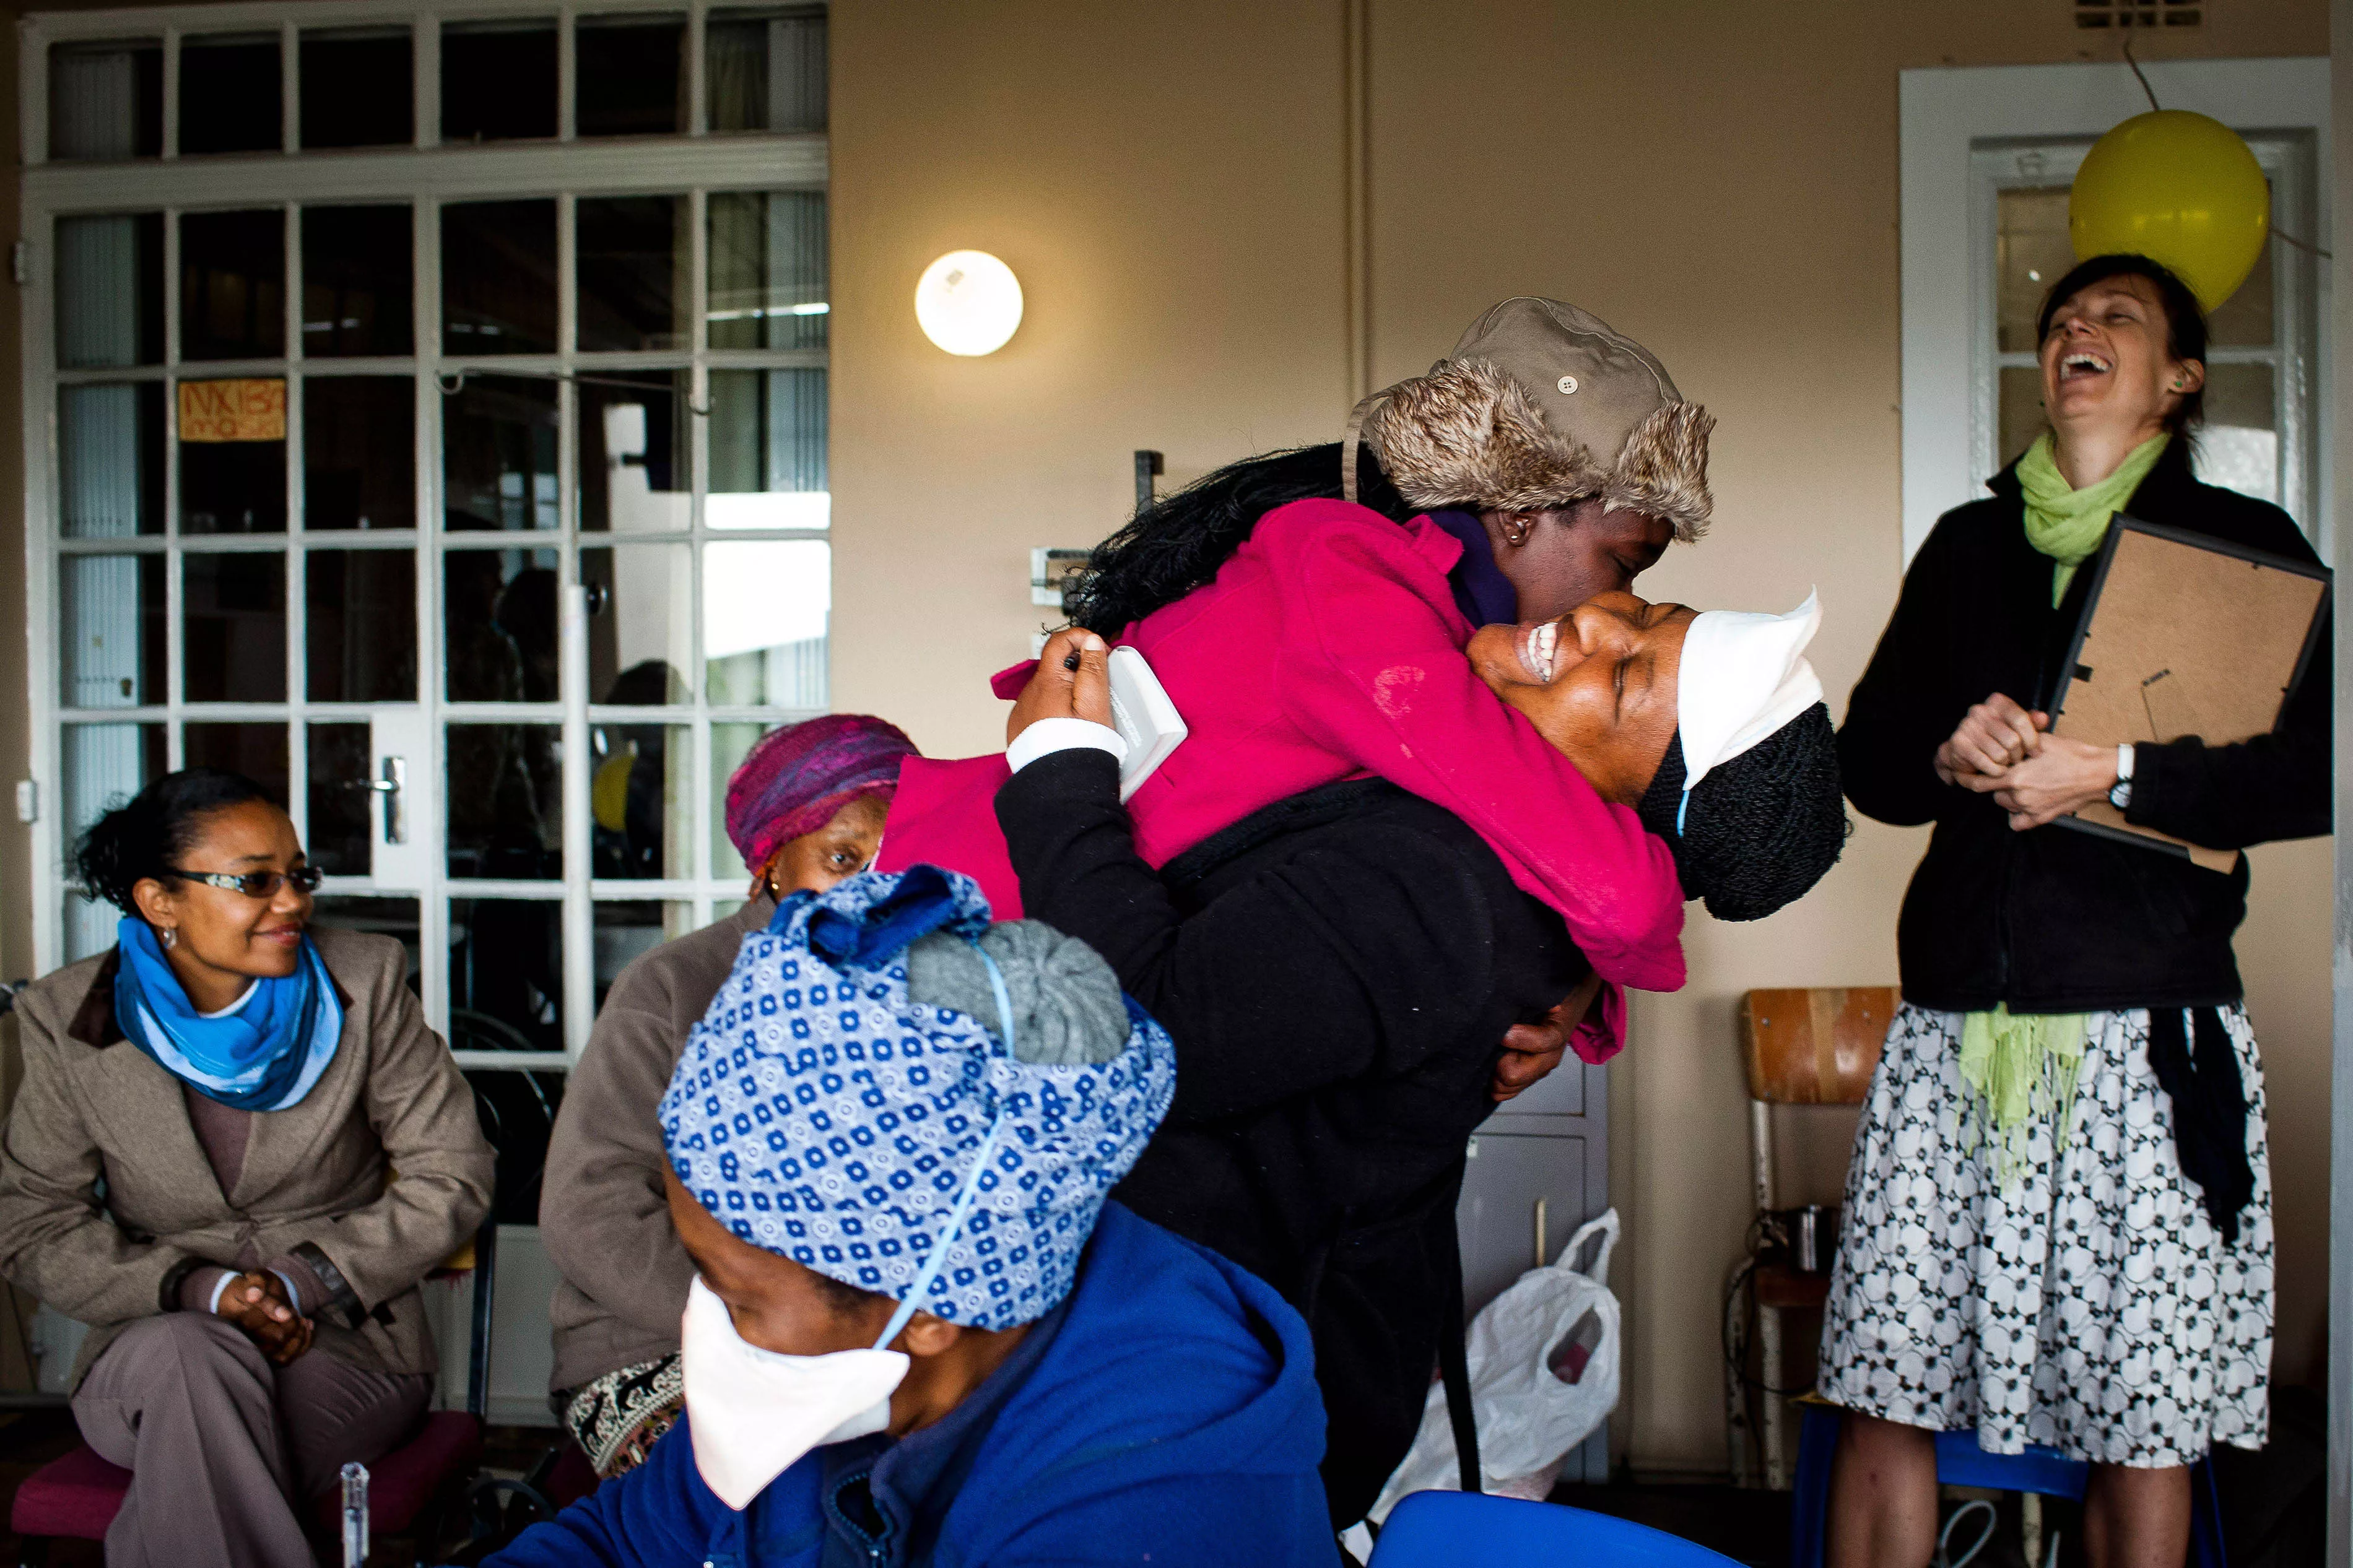 Phumeza Tisile, 23 years, celebrates her cure from XDR-TB with friends and patients at Lizo Nobanda TB Care Centre, Khayelitsha, South Africa on August 16, 2013.